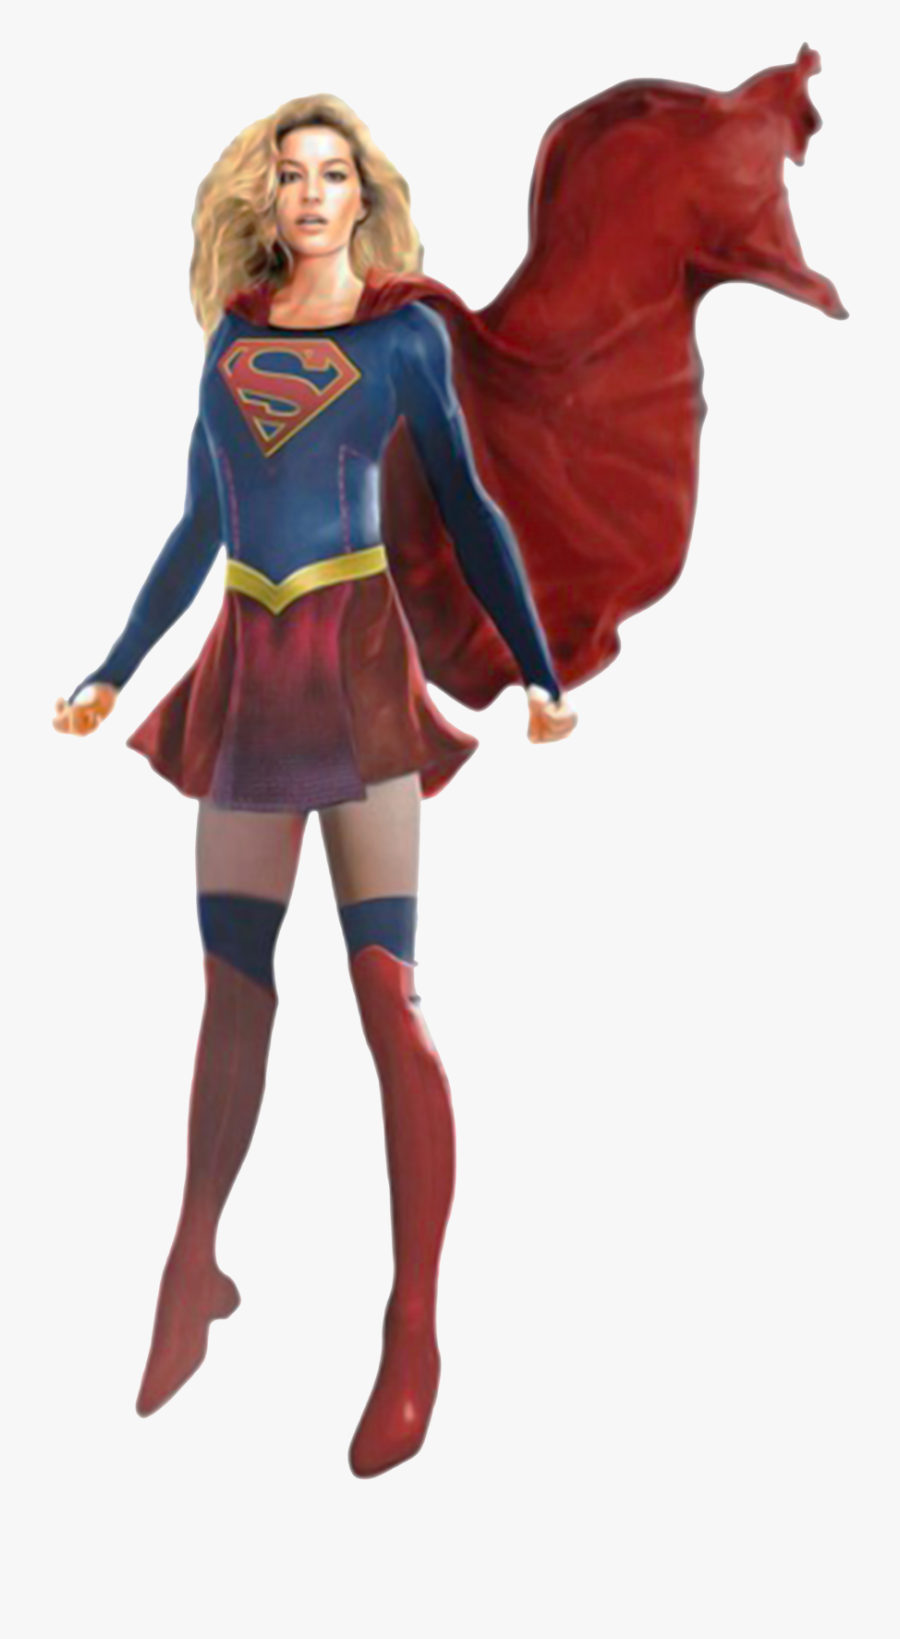 Official Supergirl Concept Art By Trickarrowdesigns - Supergirl Series Concept Art, Transparent Clipart